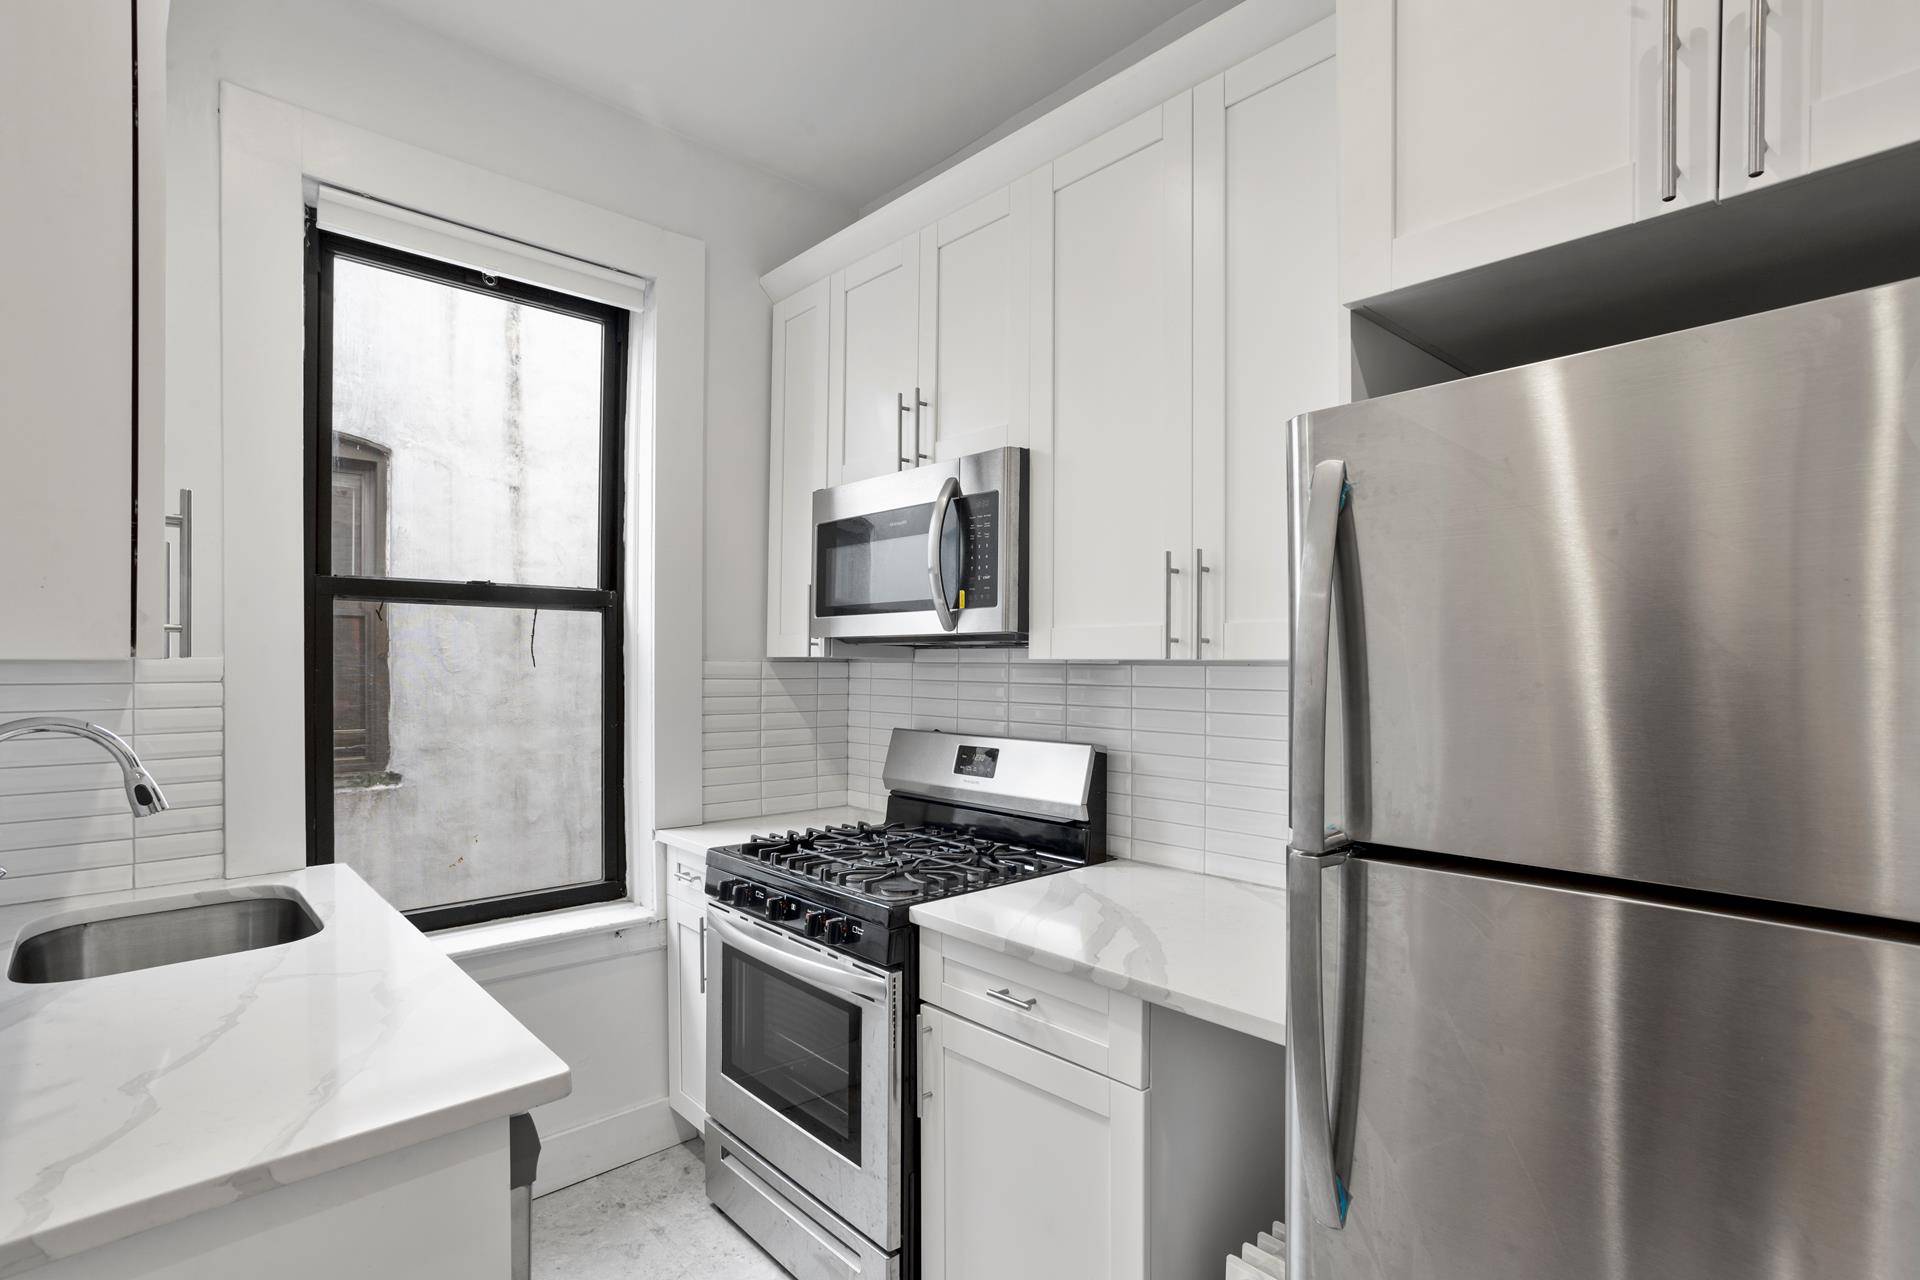 NO FEE CENTER SLOPE ! BEAUTIFUL SUNNY NEW RENOVATION WITH WASHER DRYER IN THE UNIT 4th floor walk up in an awesome Center Slope location 7th ave train half way ...